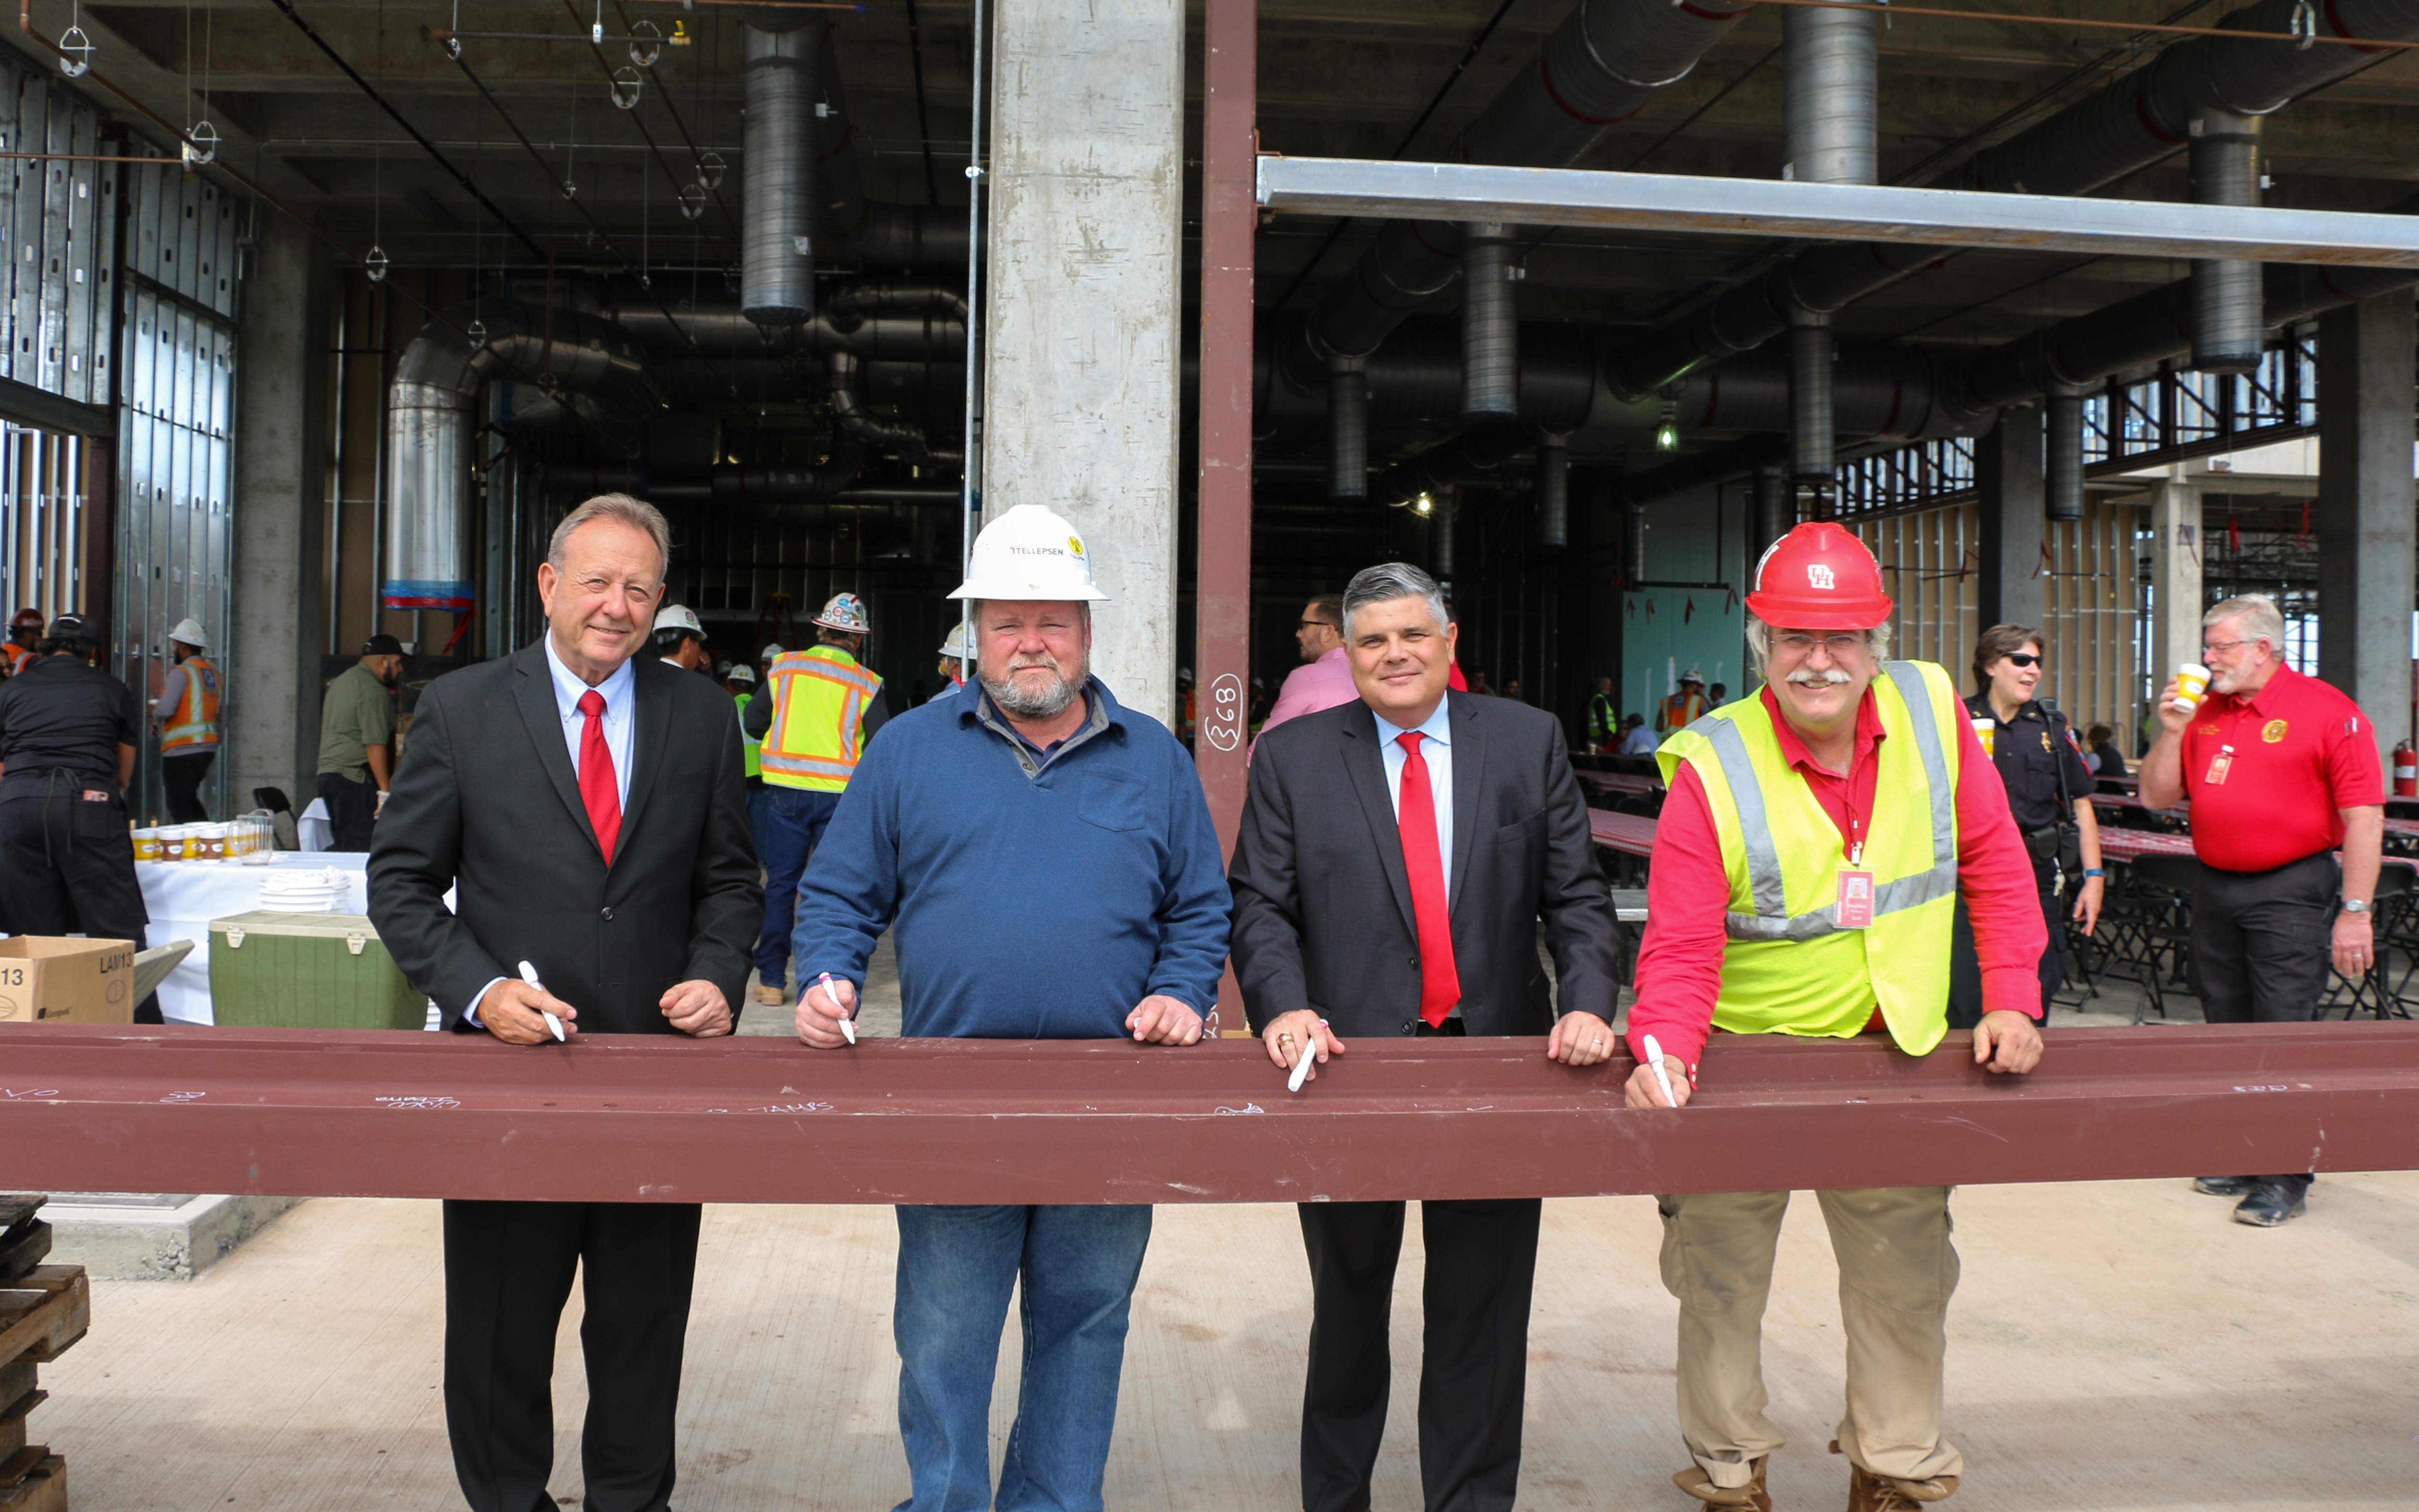 Two men in suits and two men in construction outfits signing a metal girder